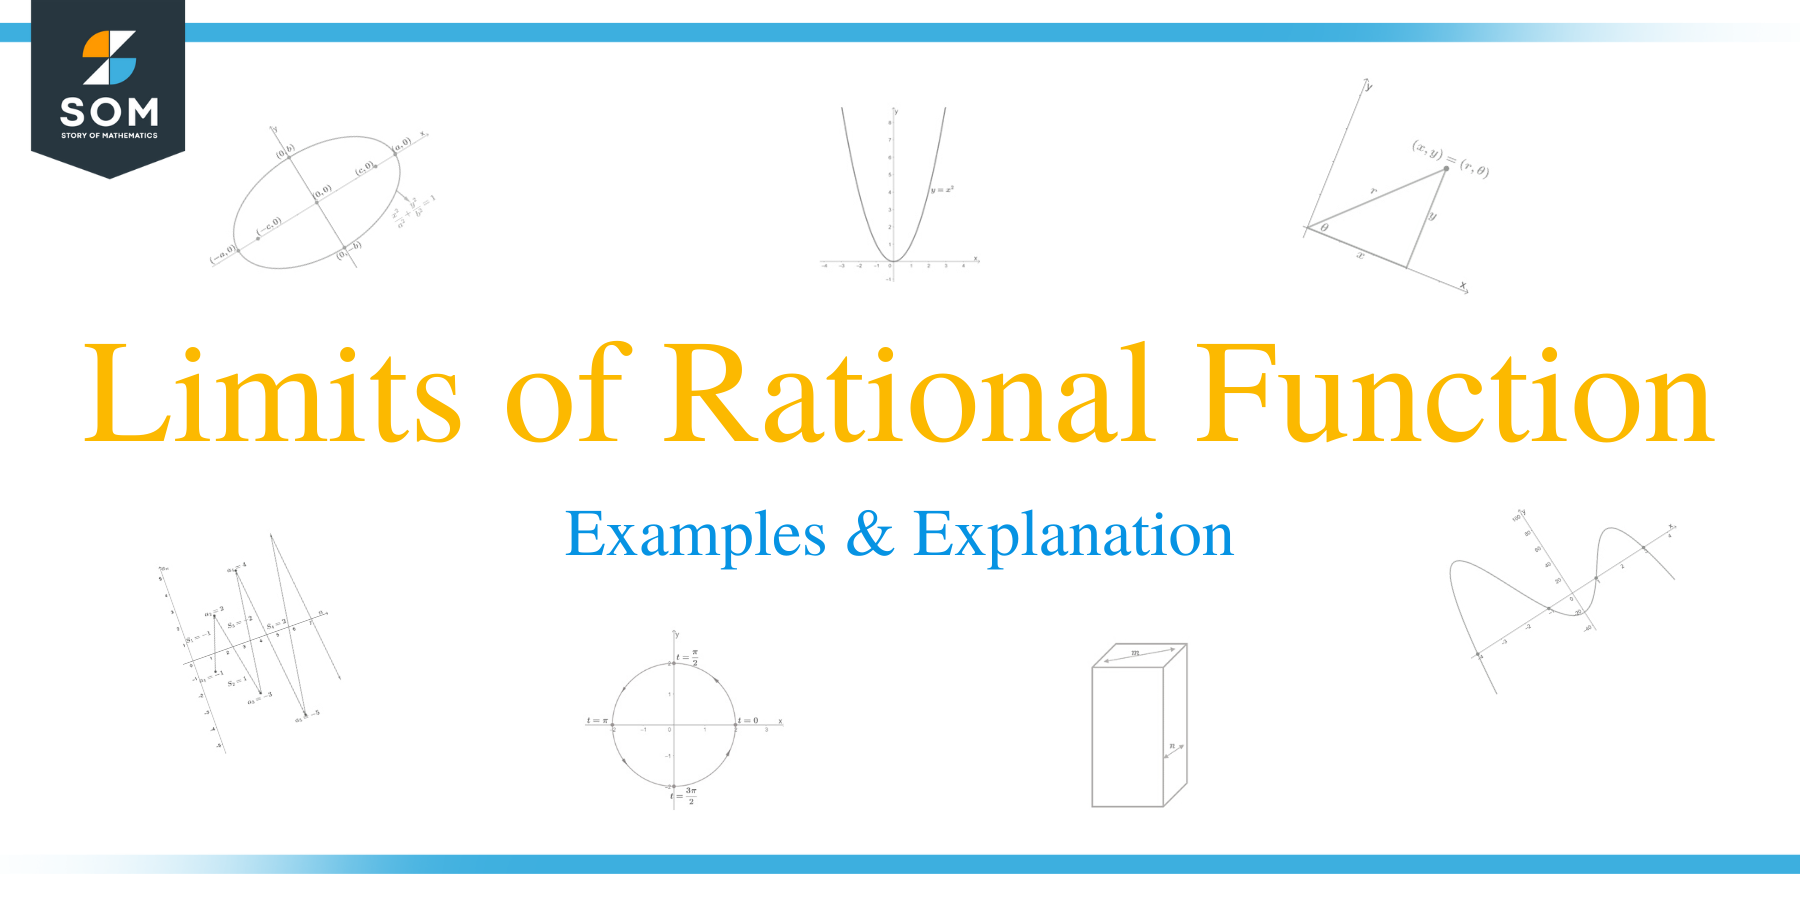 Limits of Rational Function